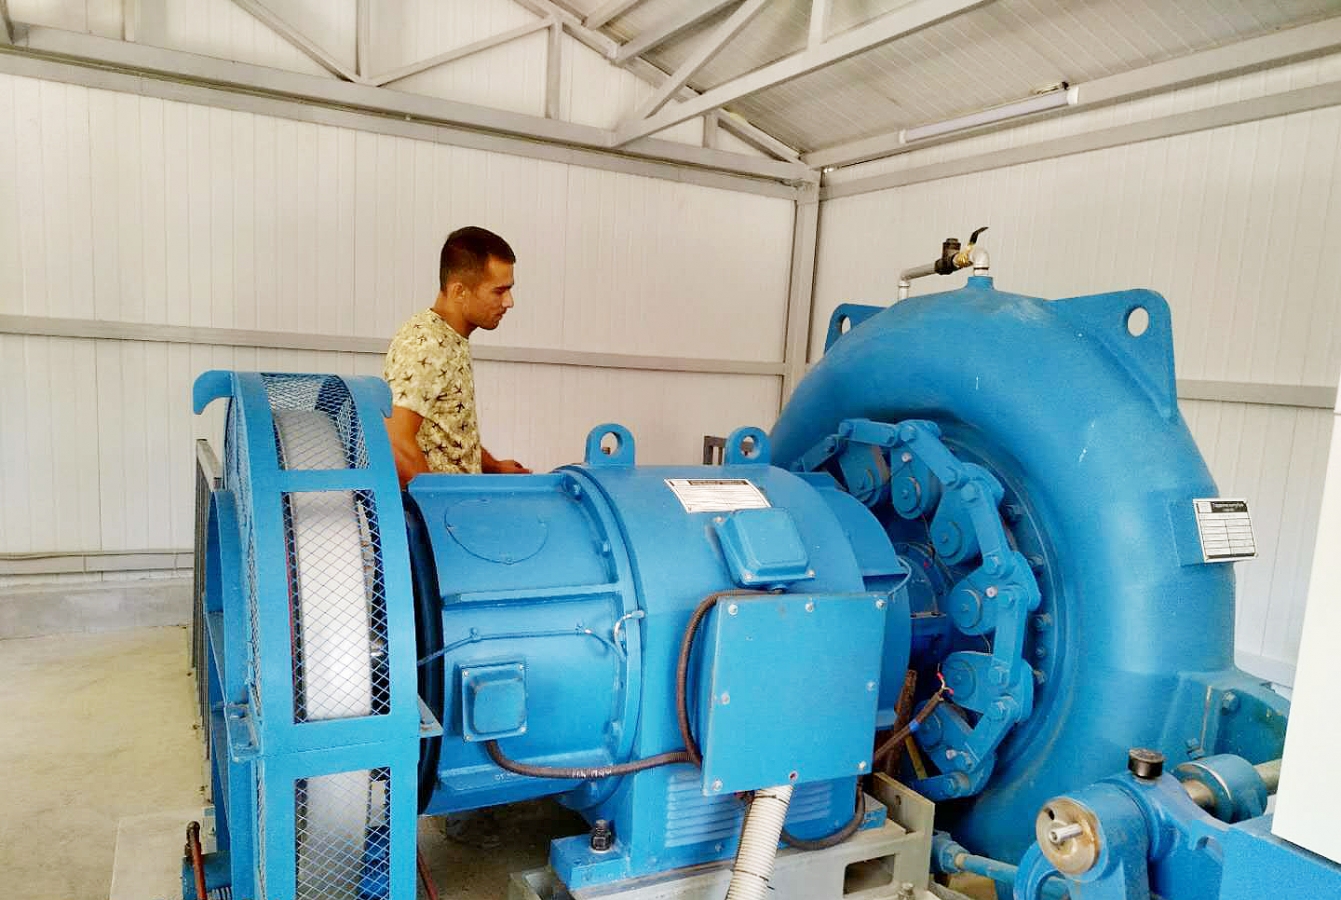 General knowledge about the maintenance of hydroelectric generating units